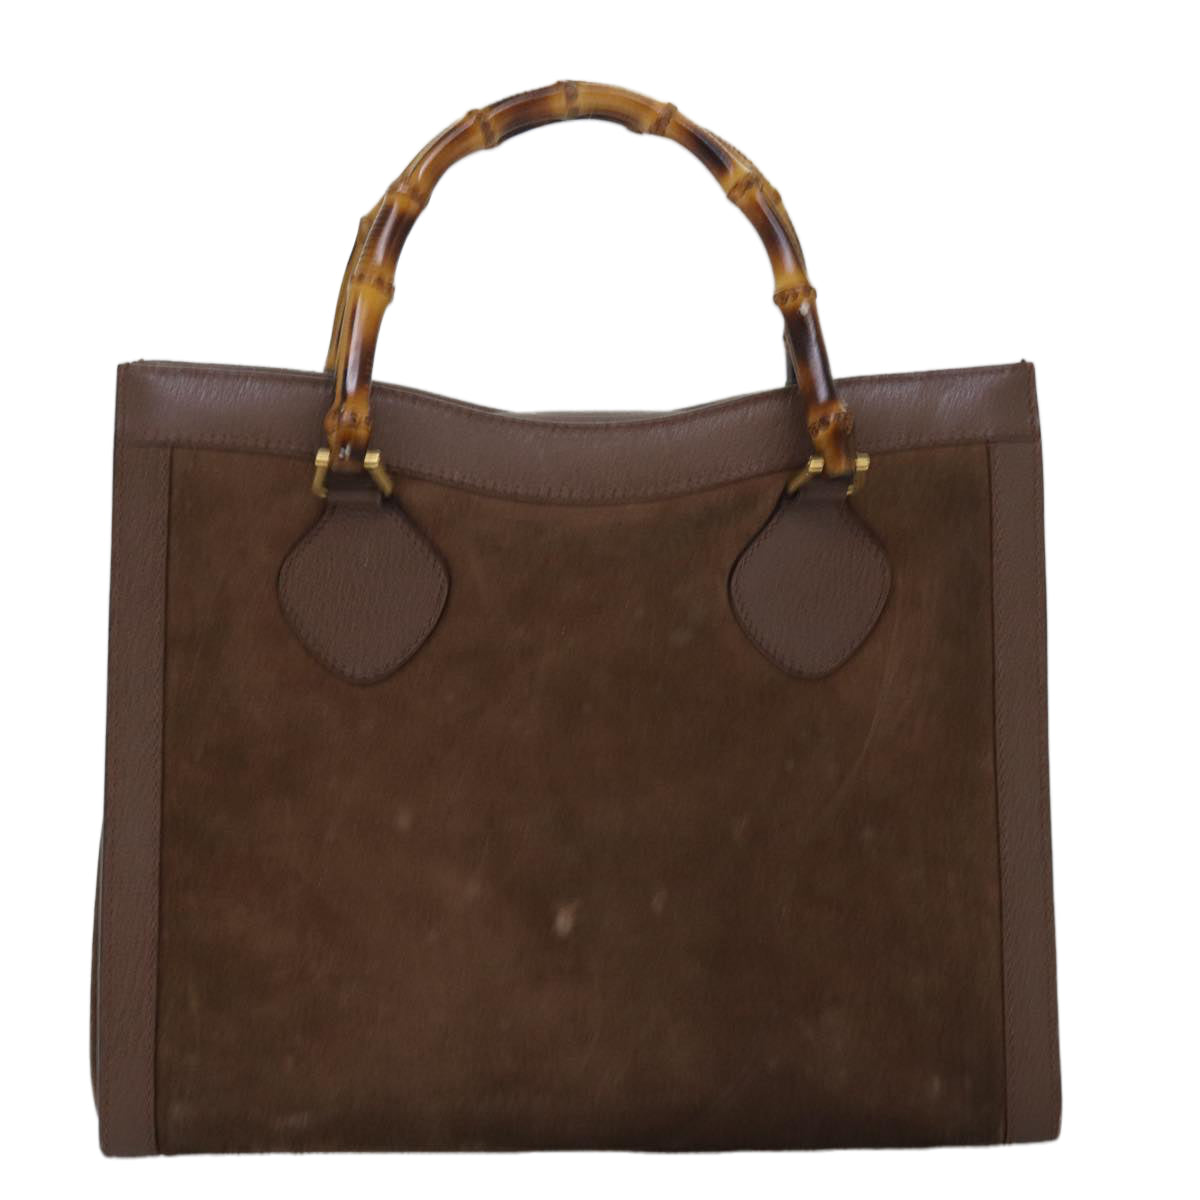 GUCCI Bamboo Tote Bag Suede Brown 002 2853 0260 0 Auth 75116